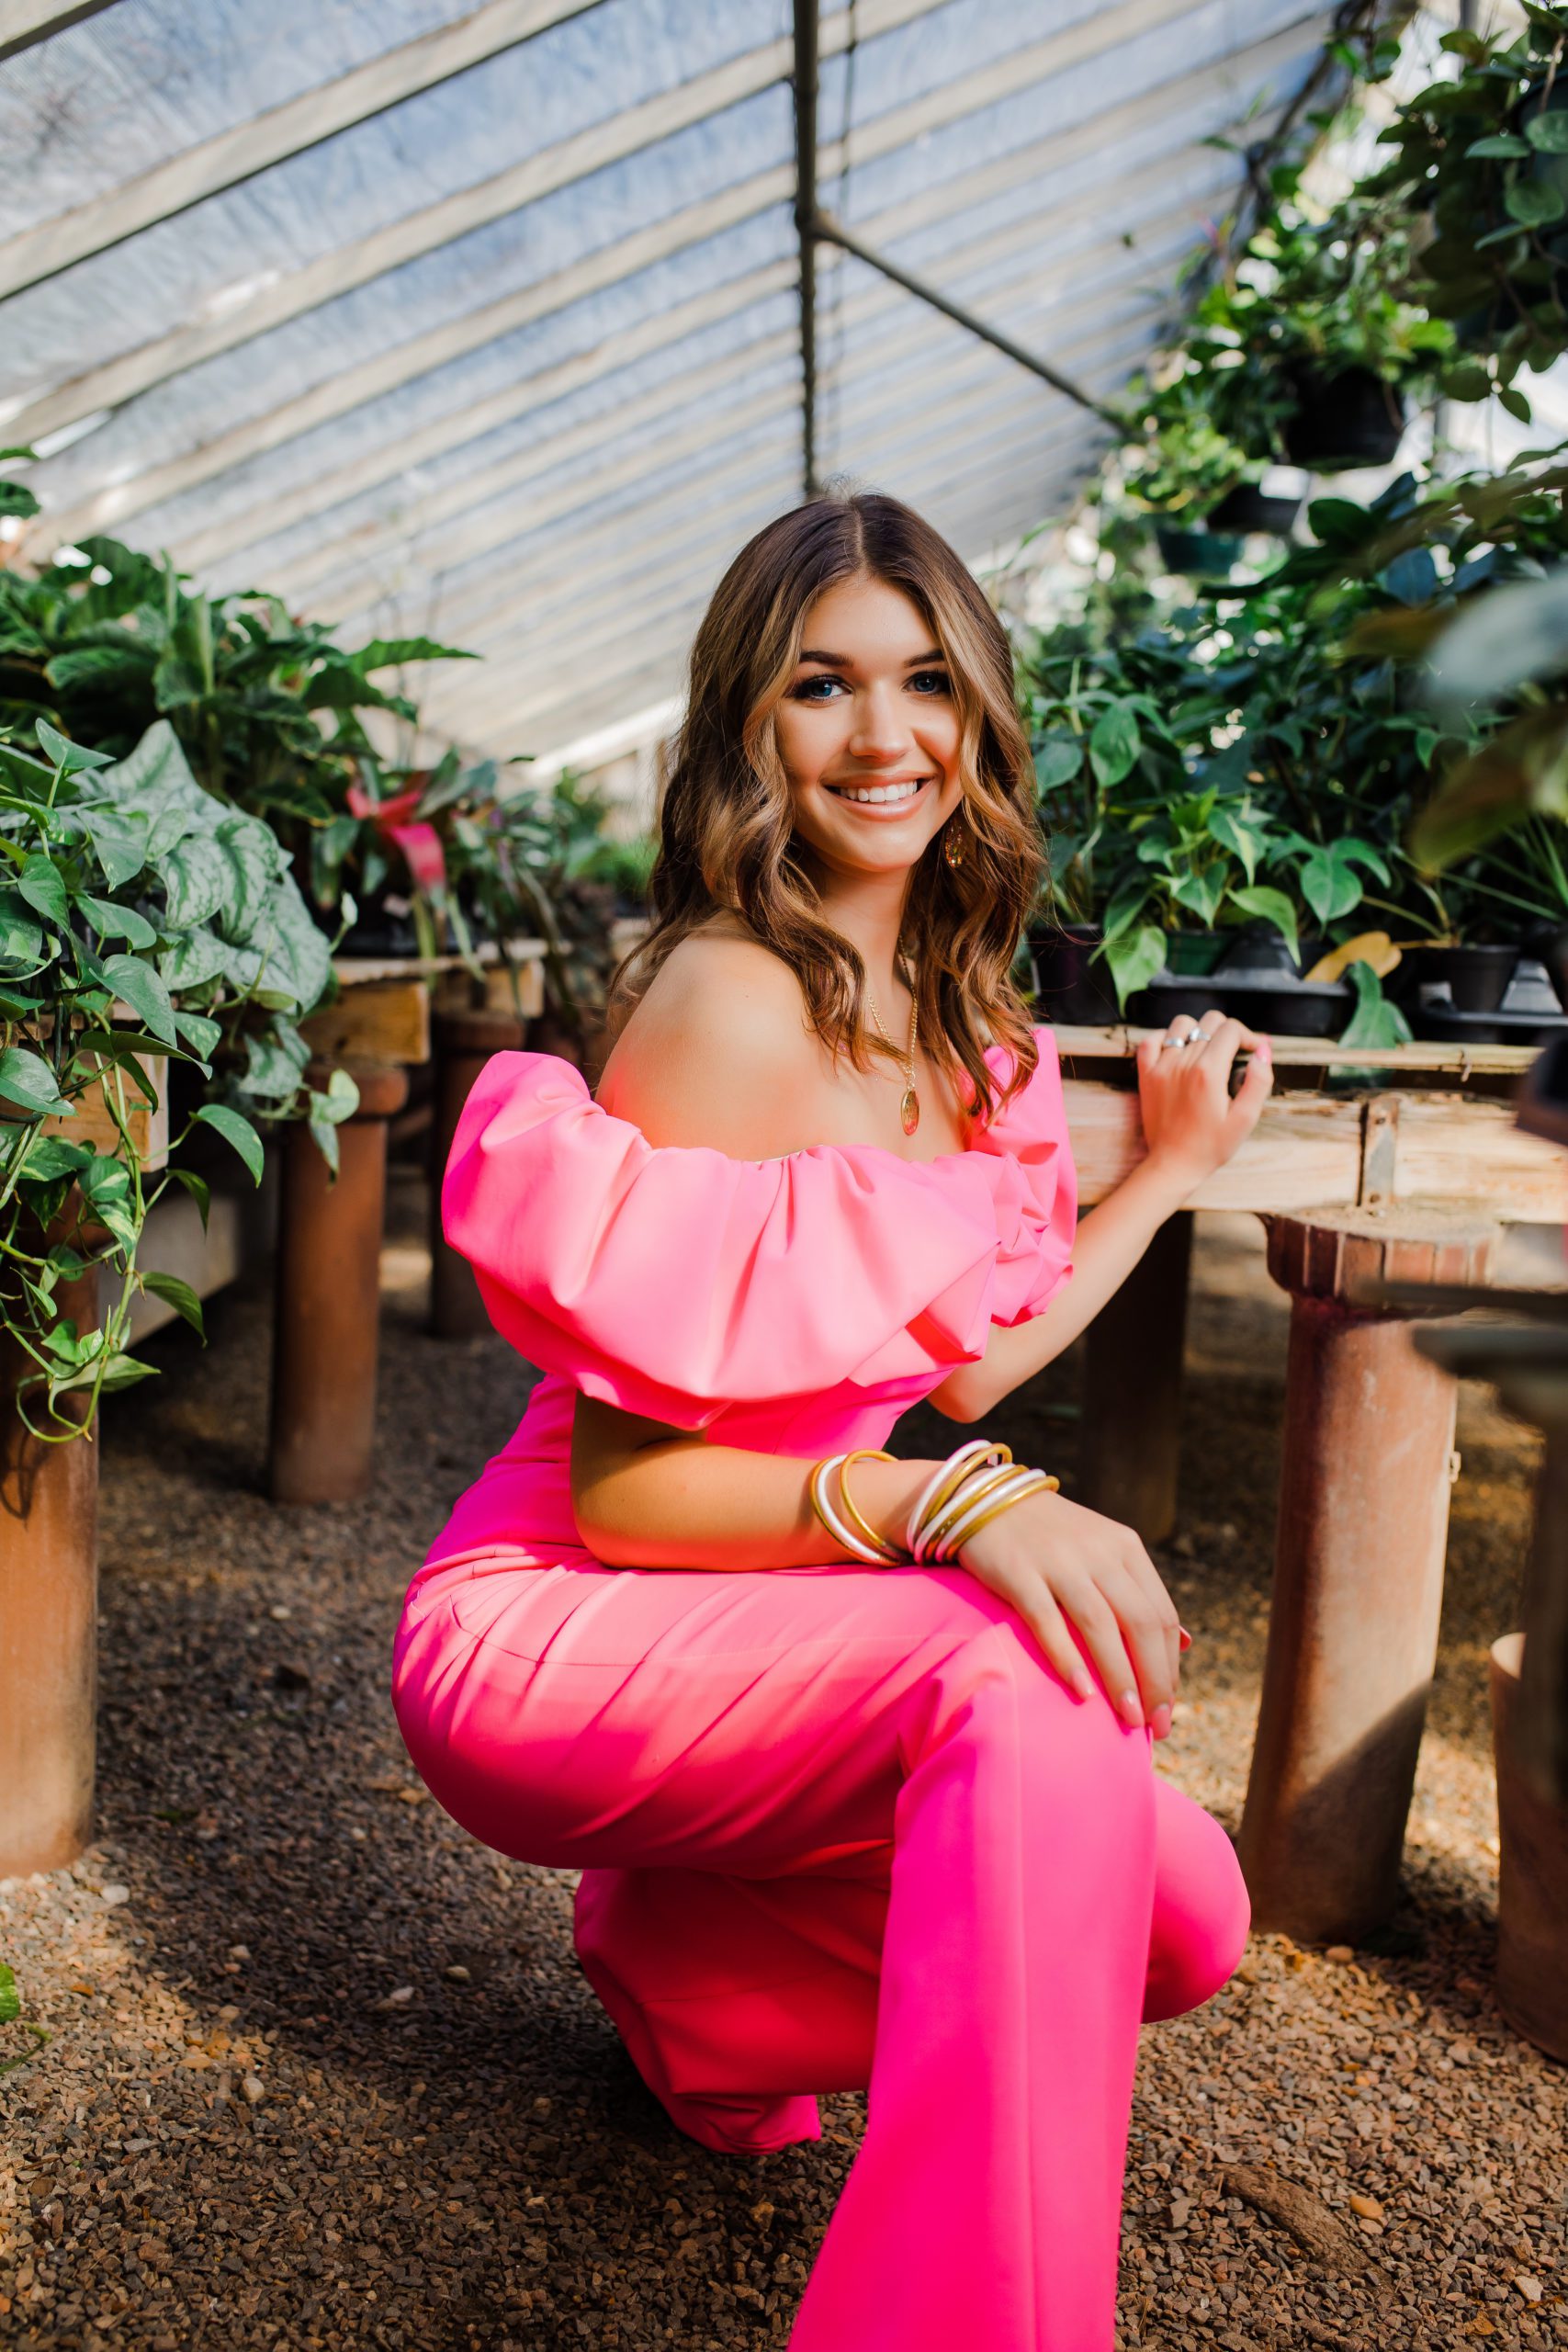 Augusta photographer captures senior pictures with girl in a hot pink outfit posing in a green house